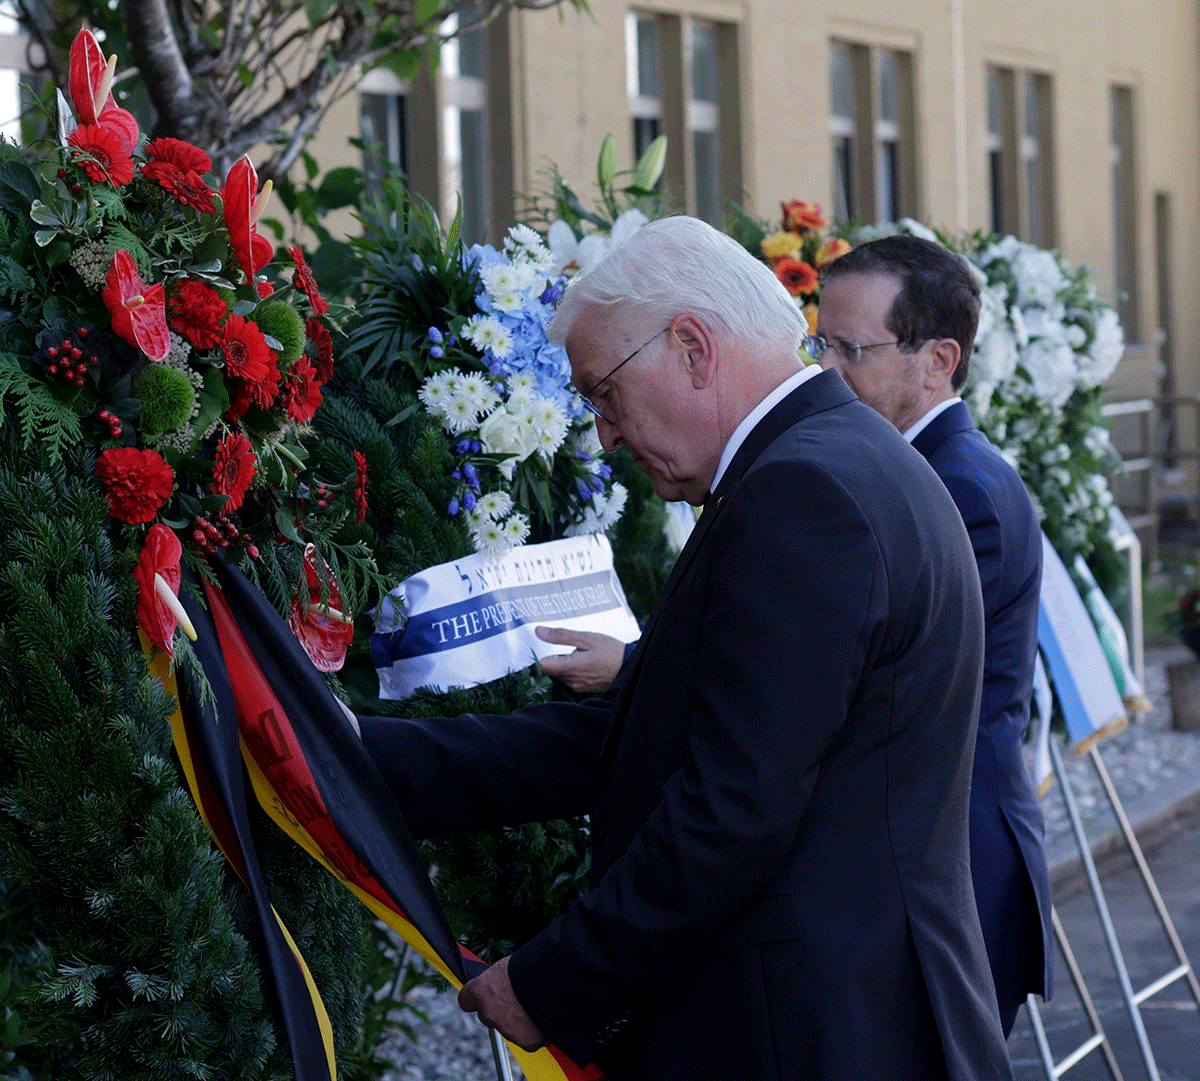 German President Frank-Walter Steinmeier and Israeli President Isaac Herzog adjust a wreath during a ceremony, commemorating the 50th anniversary of the attack in Fuerstenfeldbruck near Munich, Germany, on Monday, September 5, 2022. 